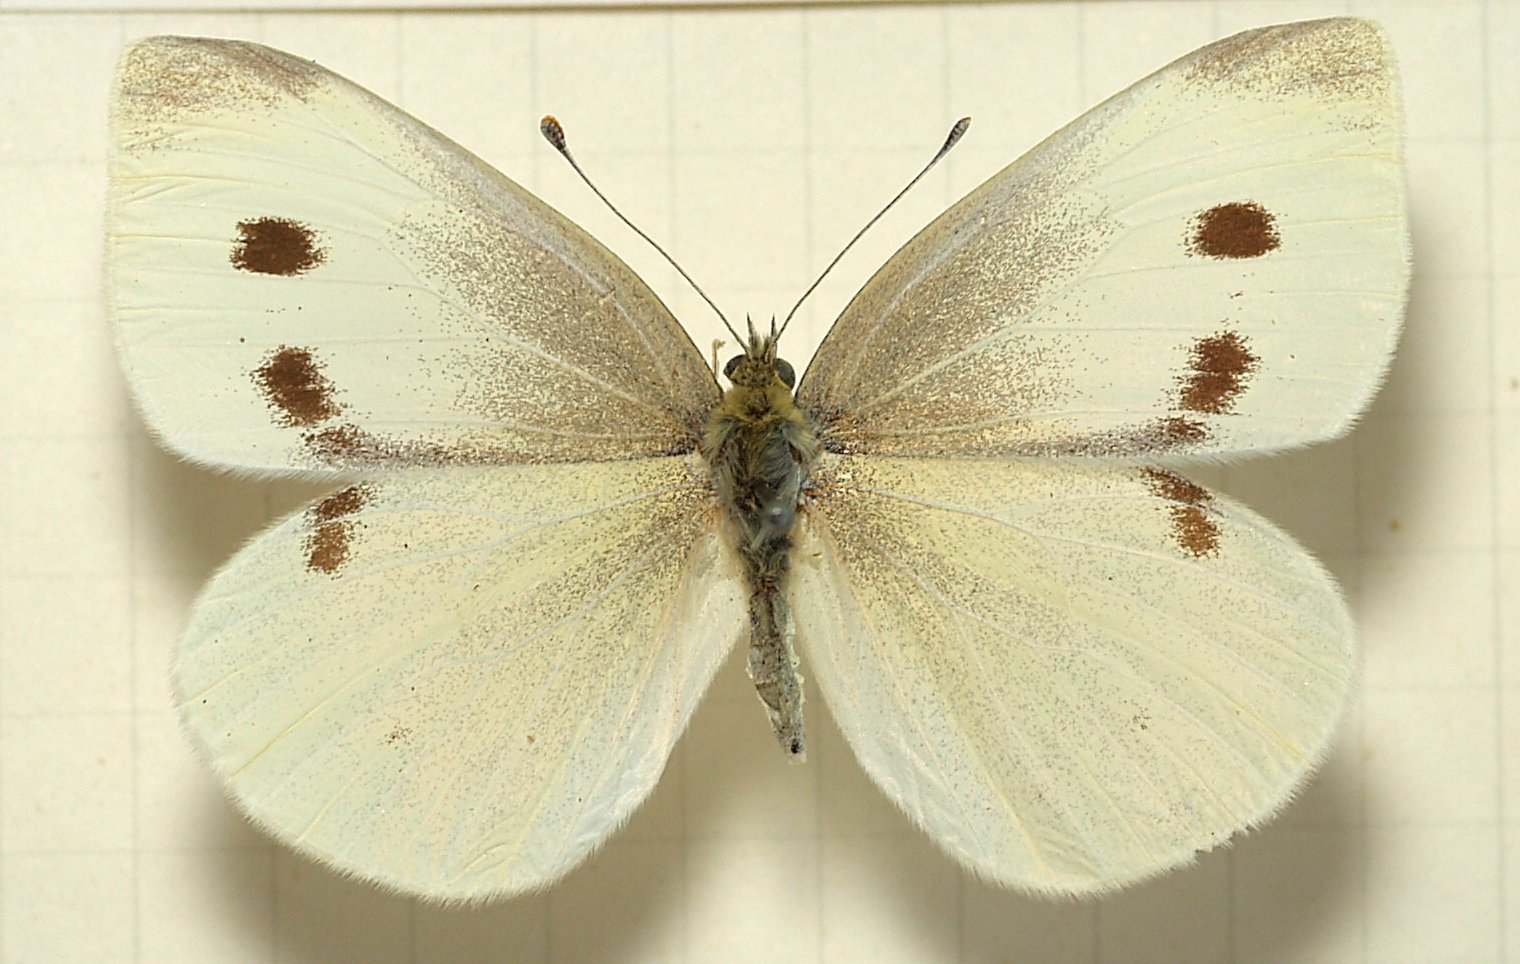 Are all white butterflies cabbage butterflies?